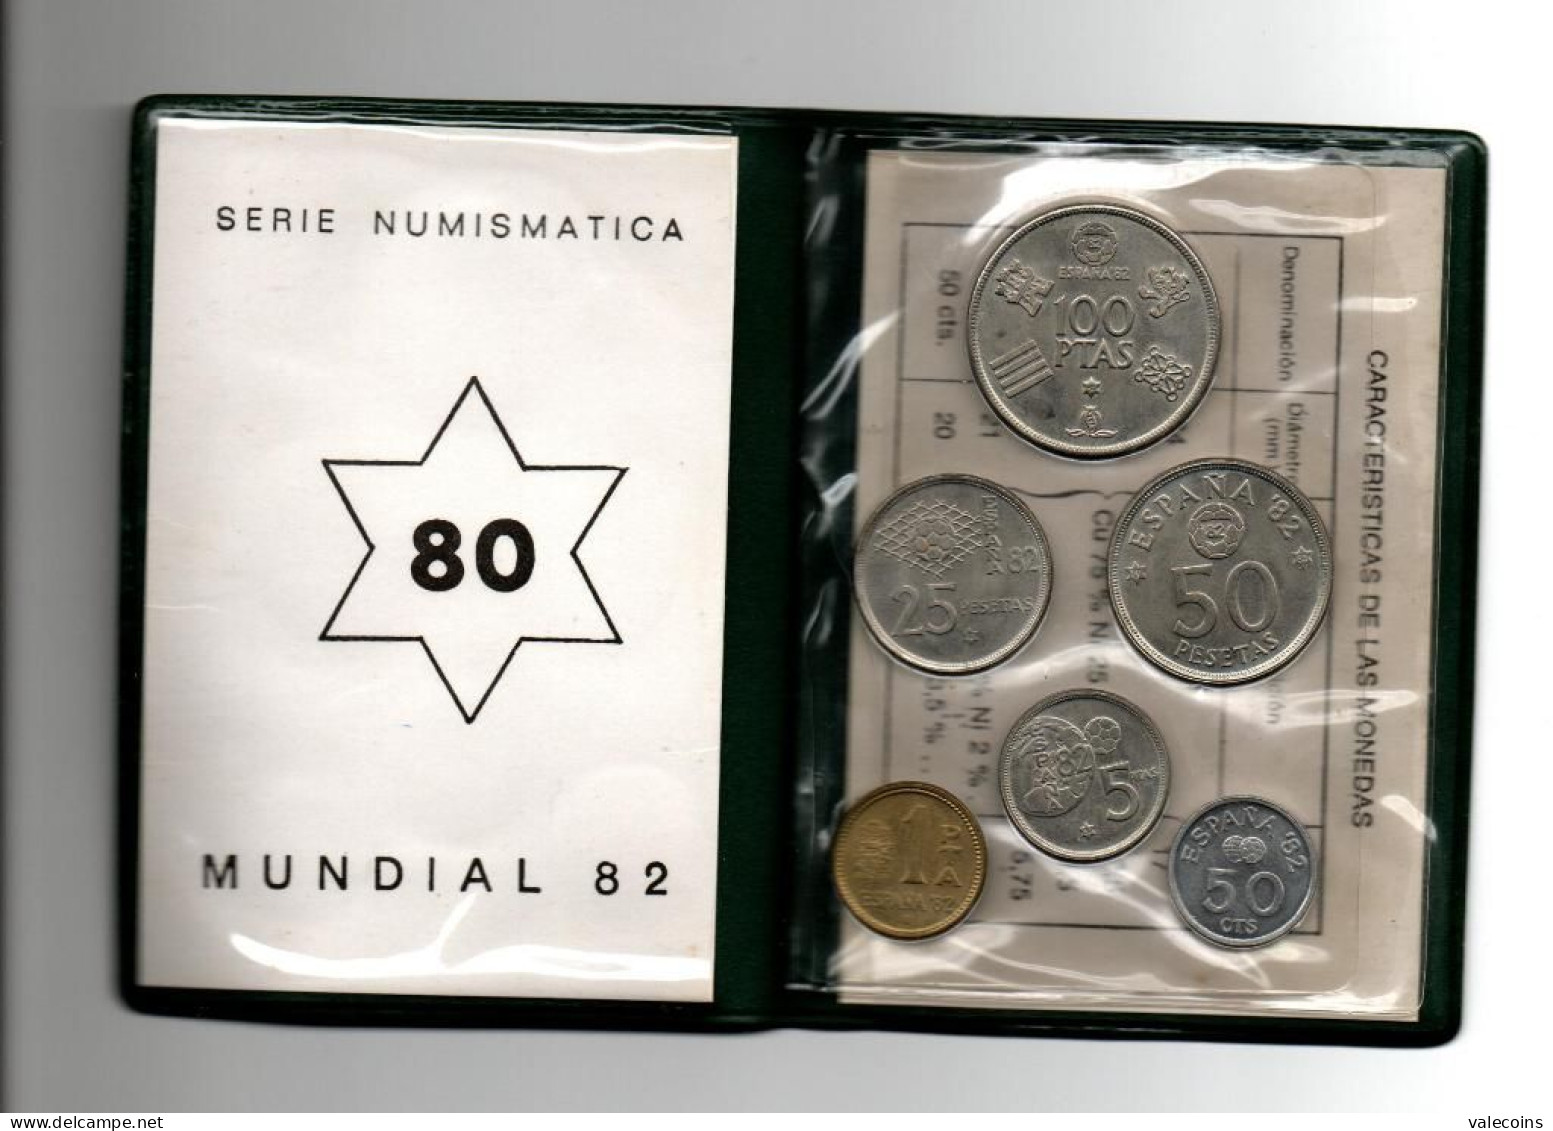 Spagna España Spain - 1982 - 6 COINS - Football Soccer Mundial Mondiale - KMS OFFICIAL ISSUE - LIMITED ISSUE - Münz- Und Jahressets